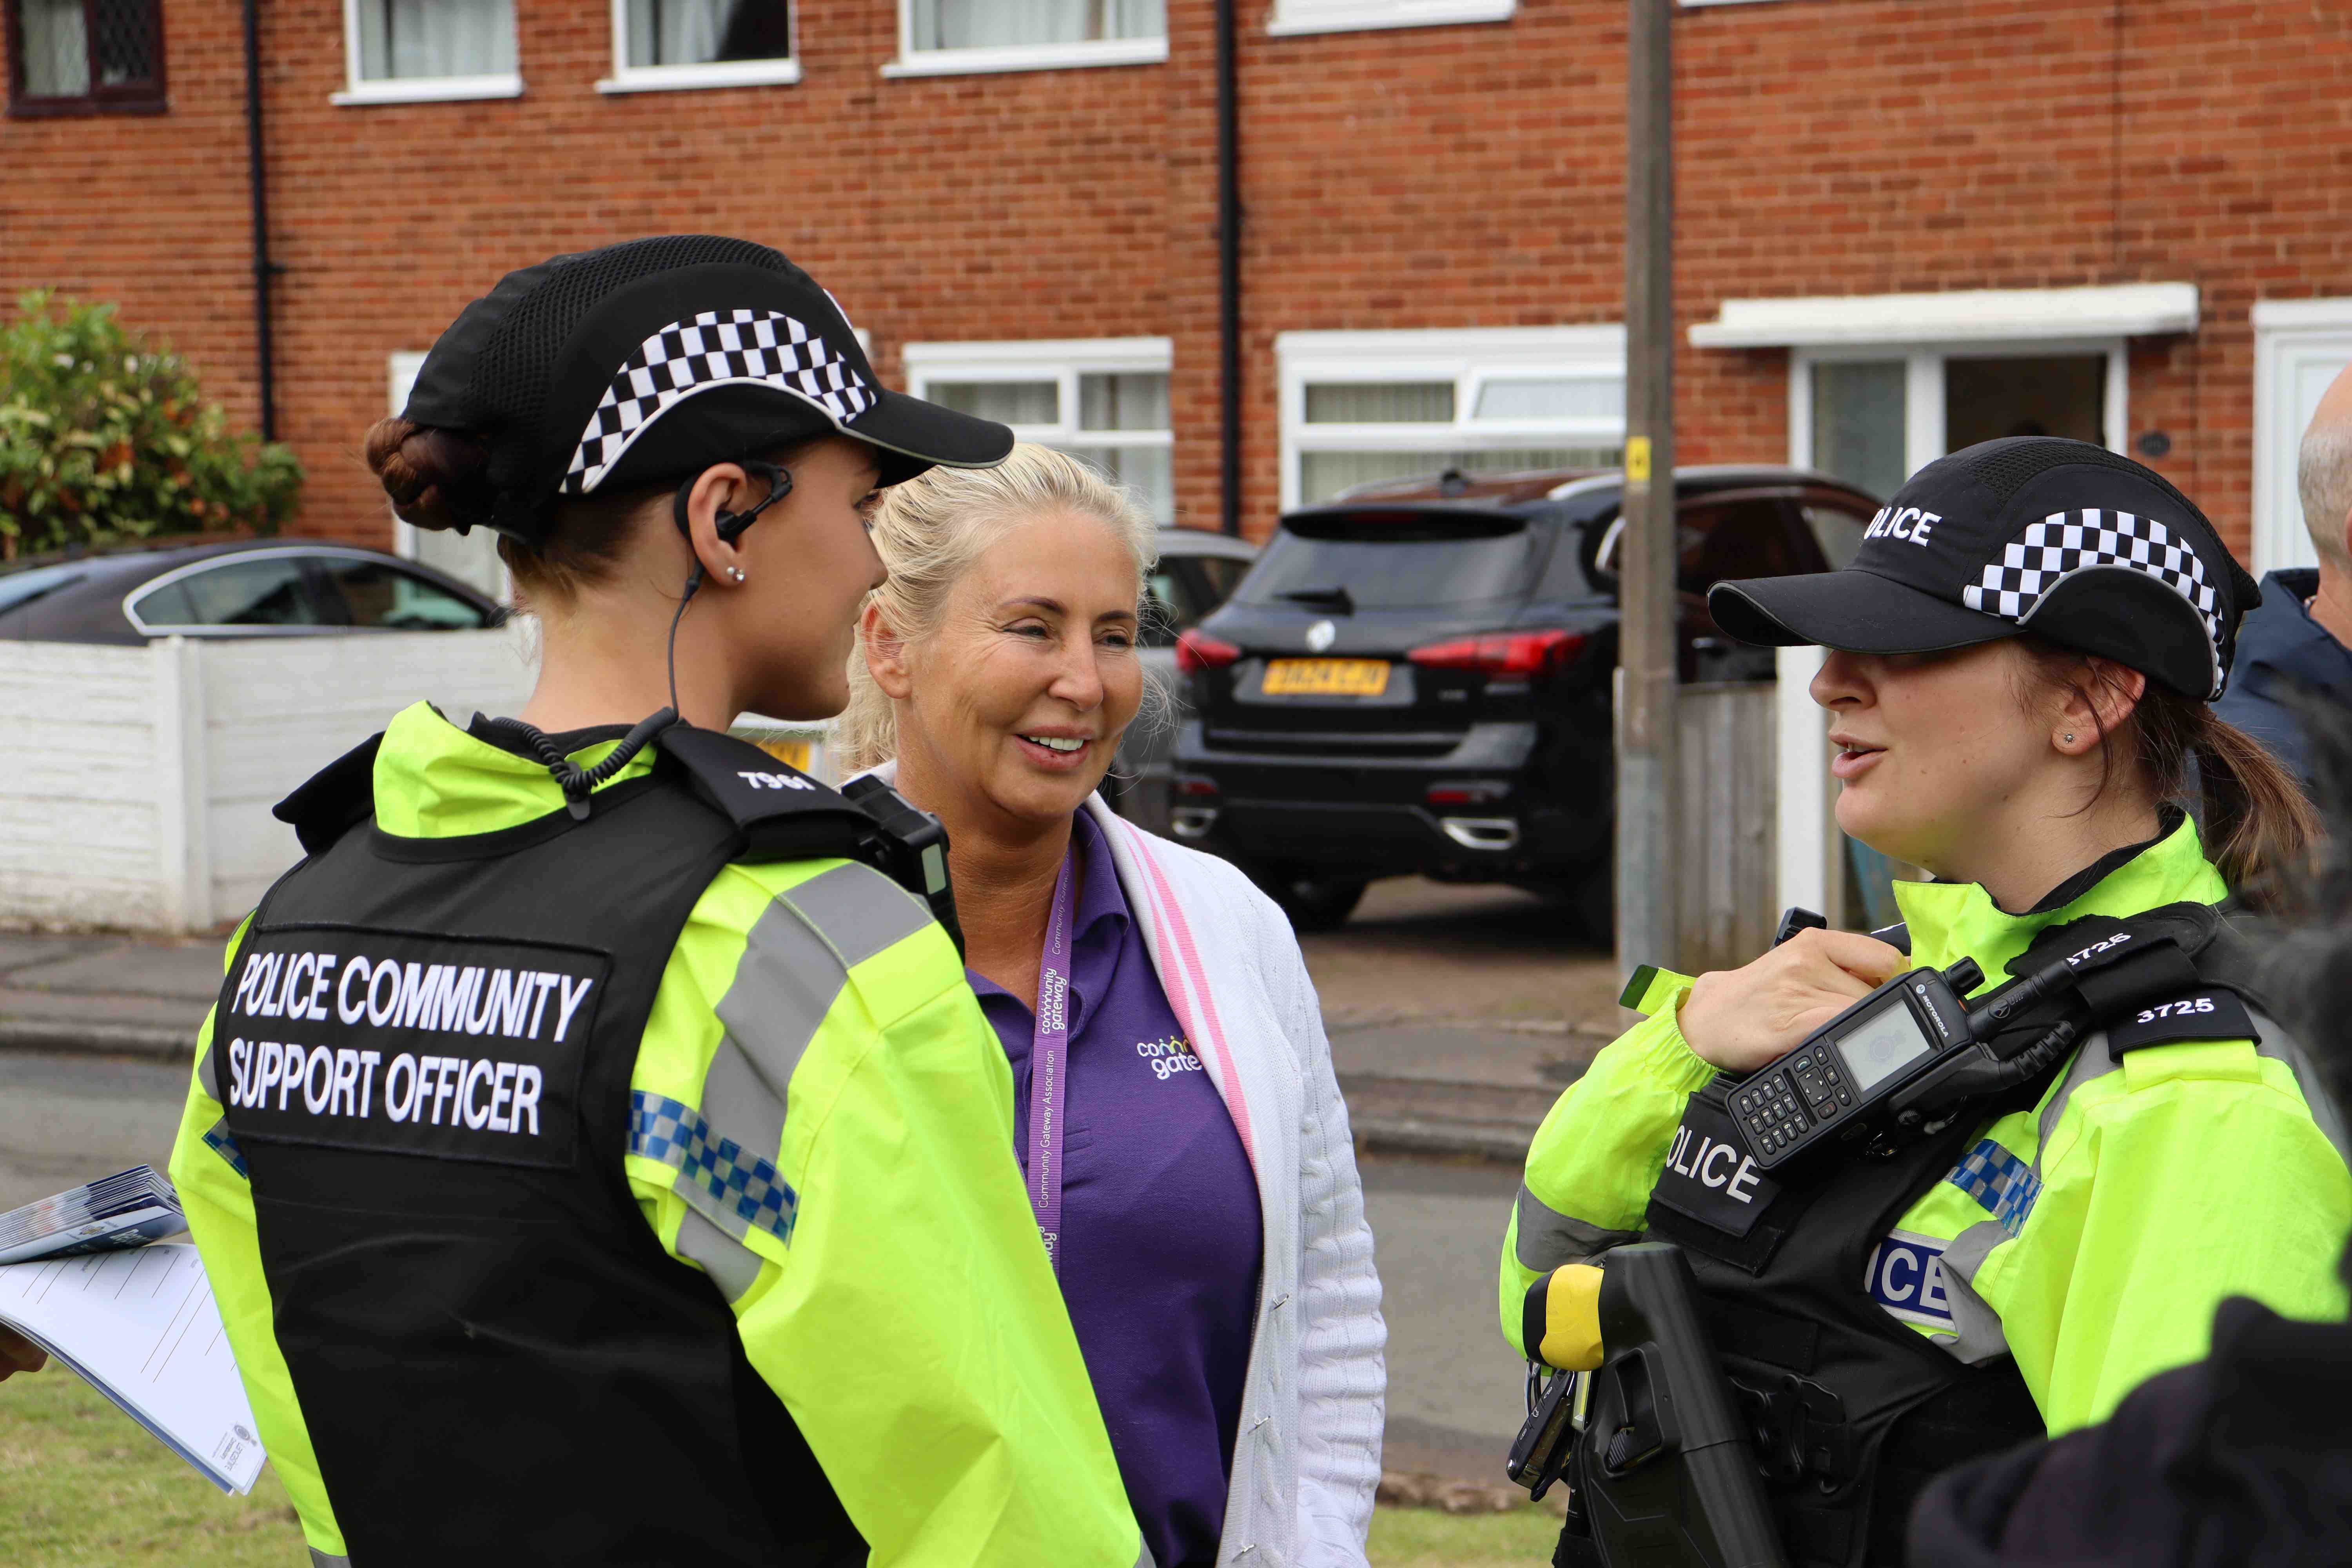 Community work with the Police